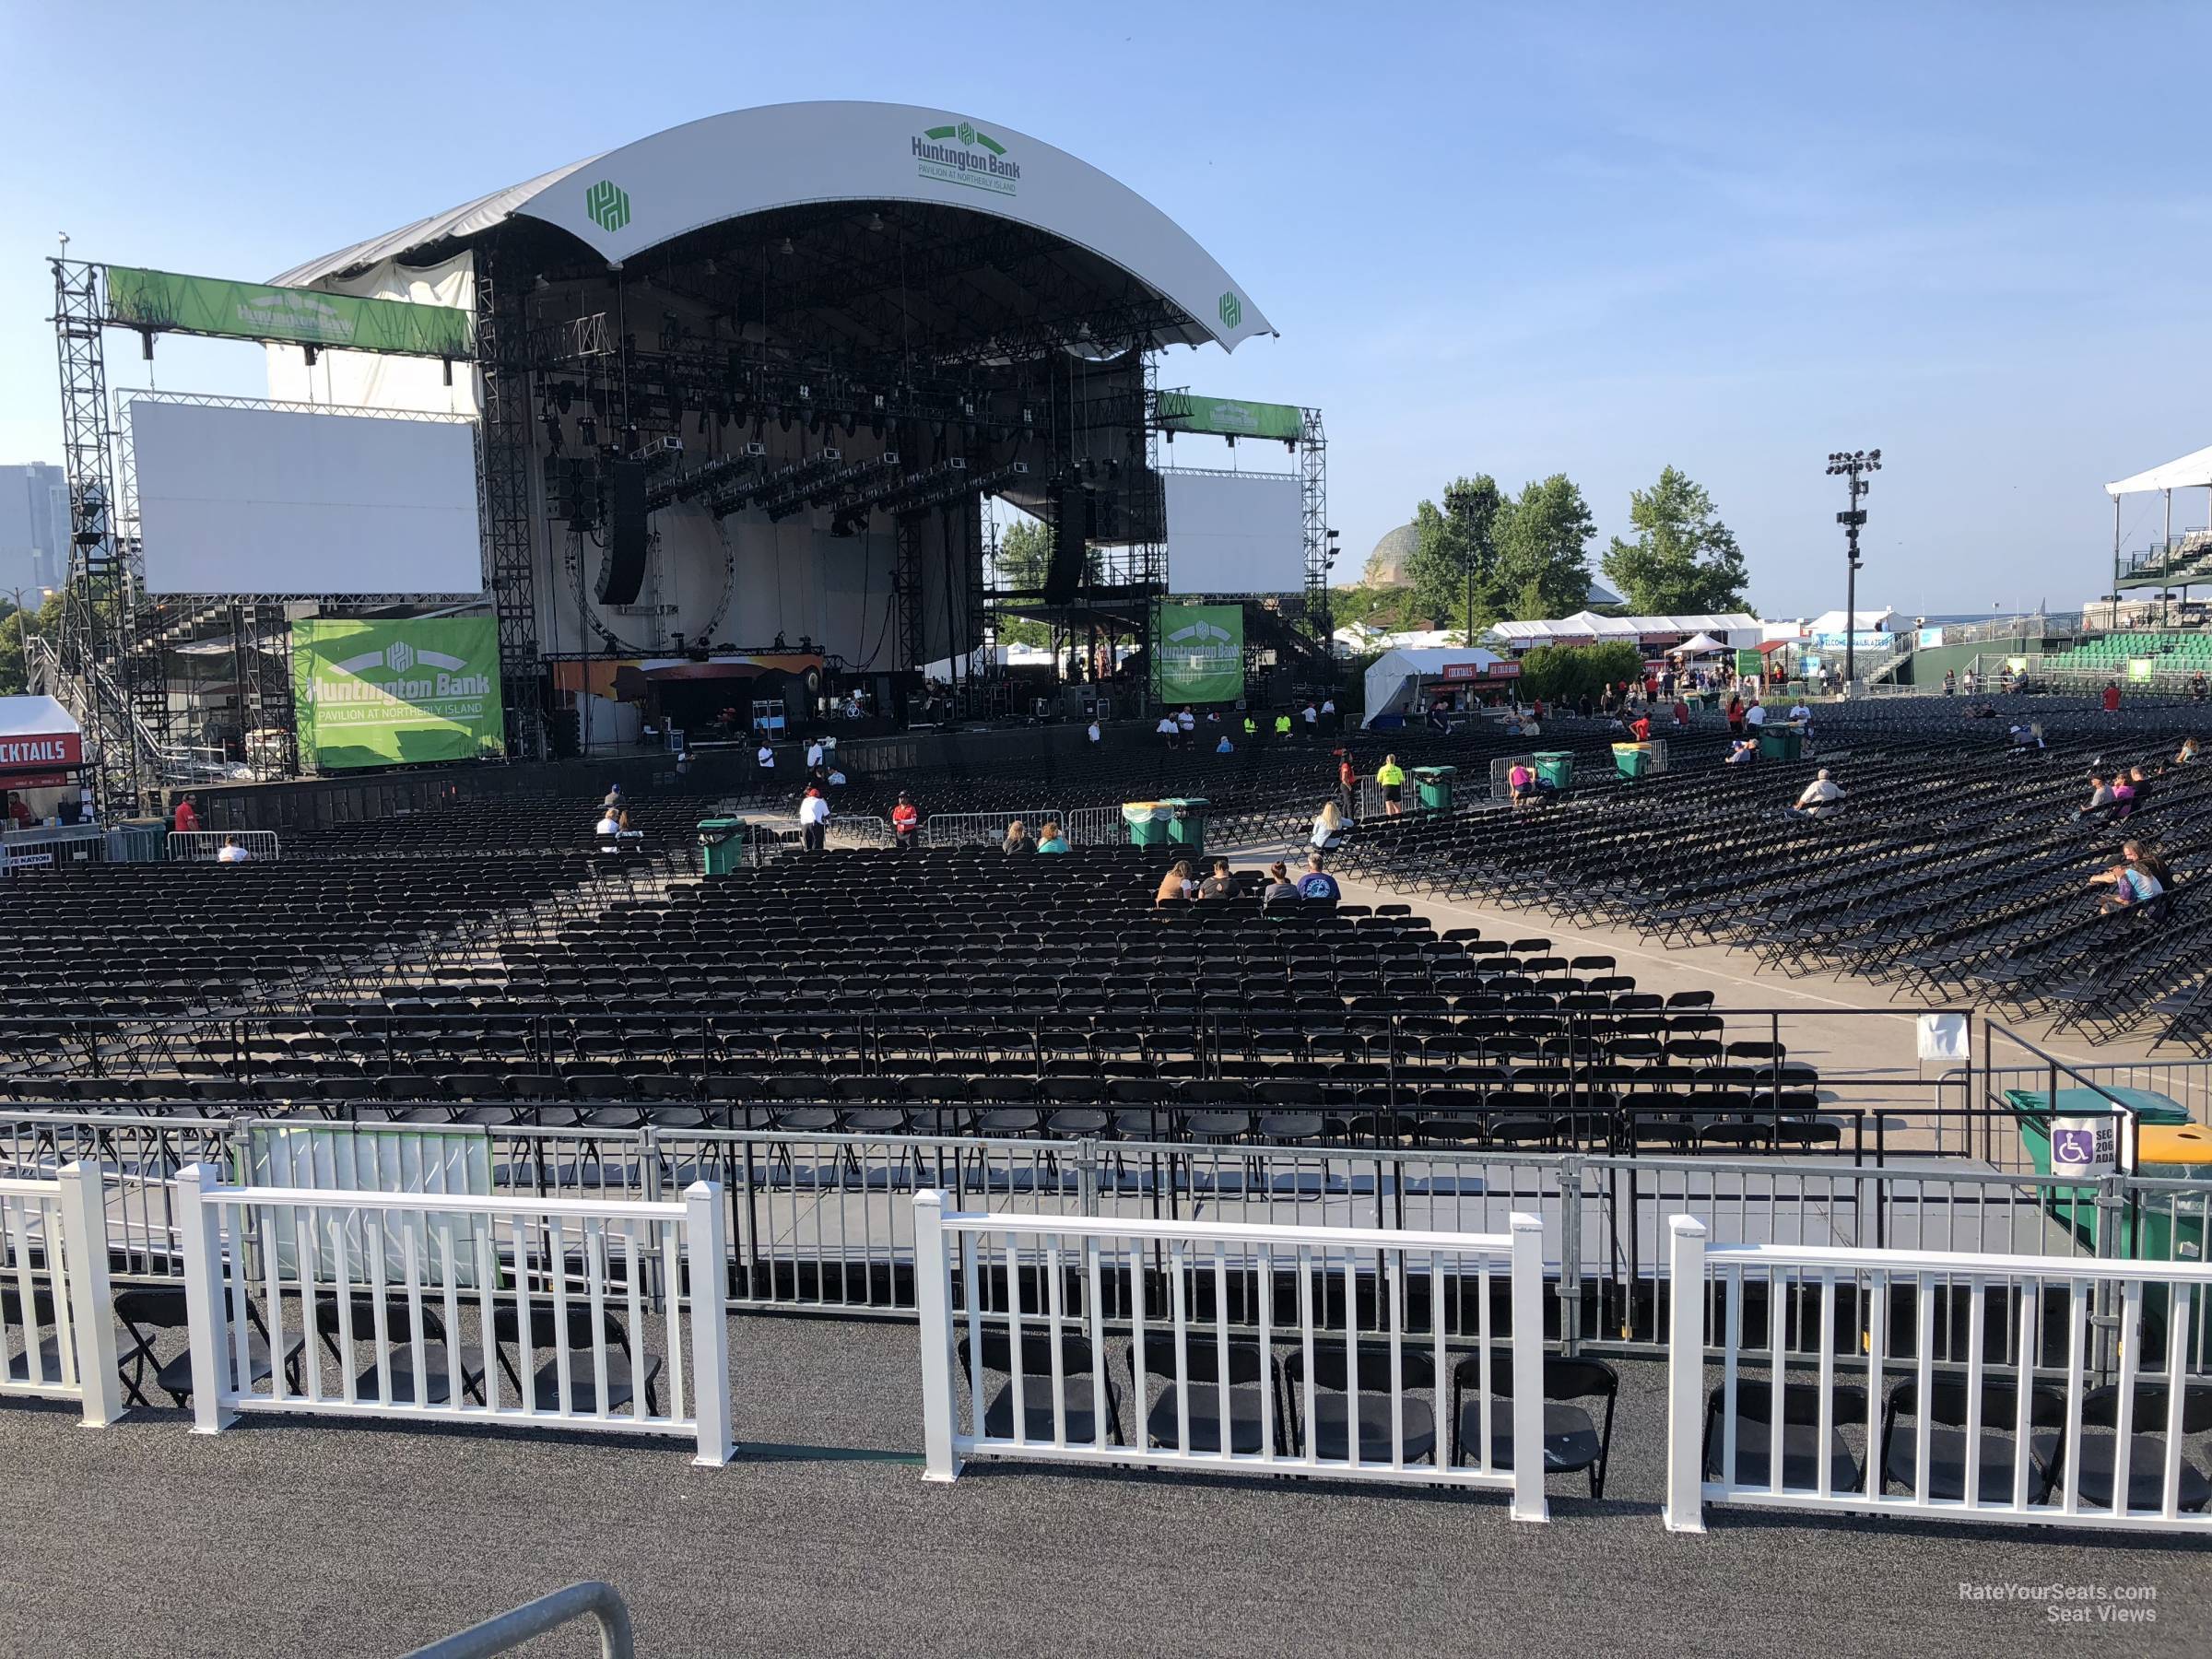 section 310, row d seat view  - huntington bank pavilion (at northerly island)